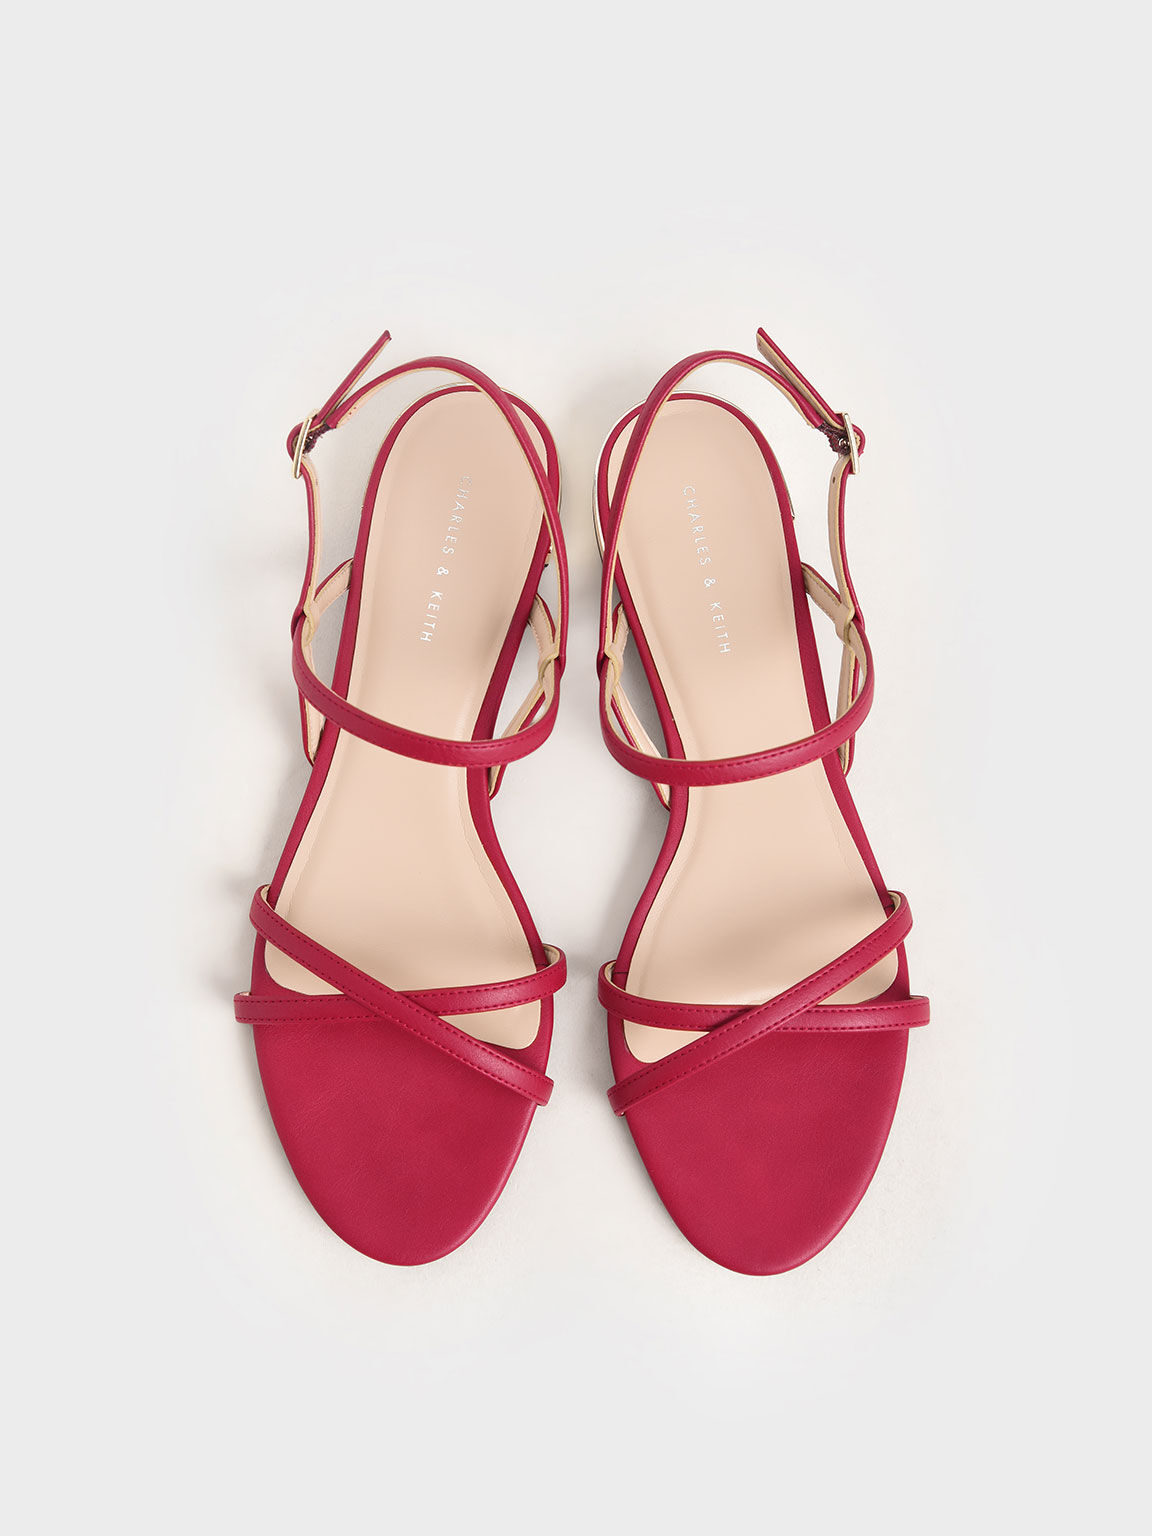 Strappy Flat Sandals, Red, hi-res